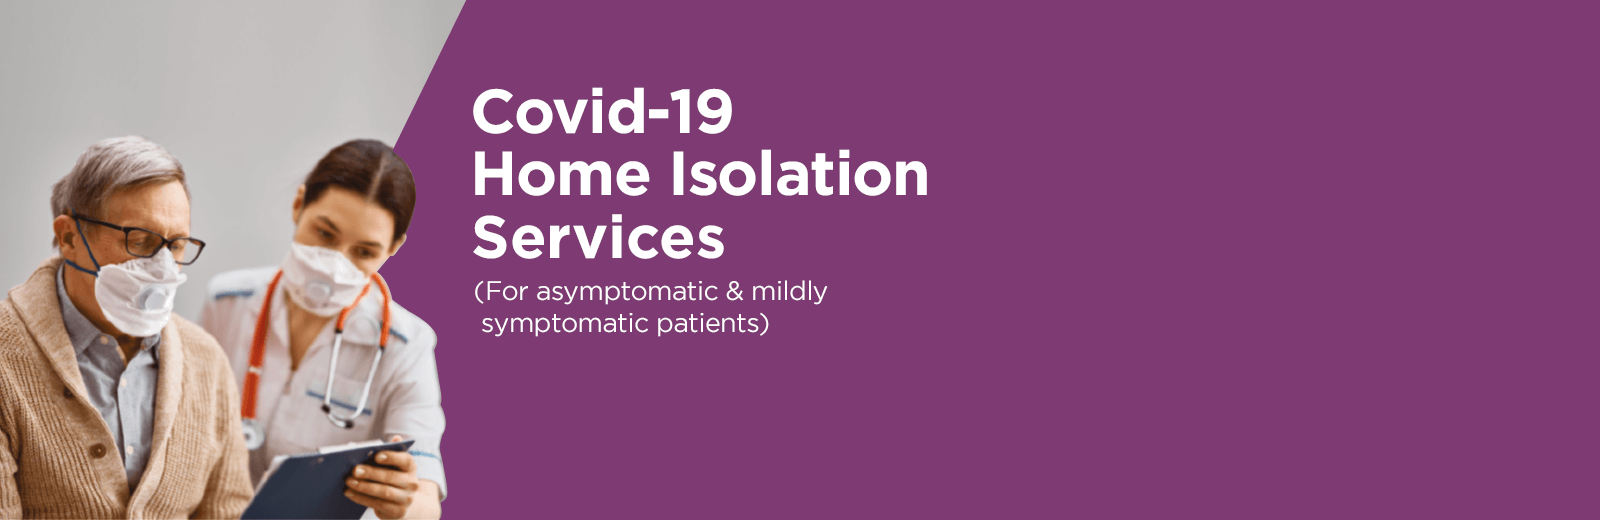 COVID-19 Home Isolation Package